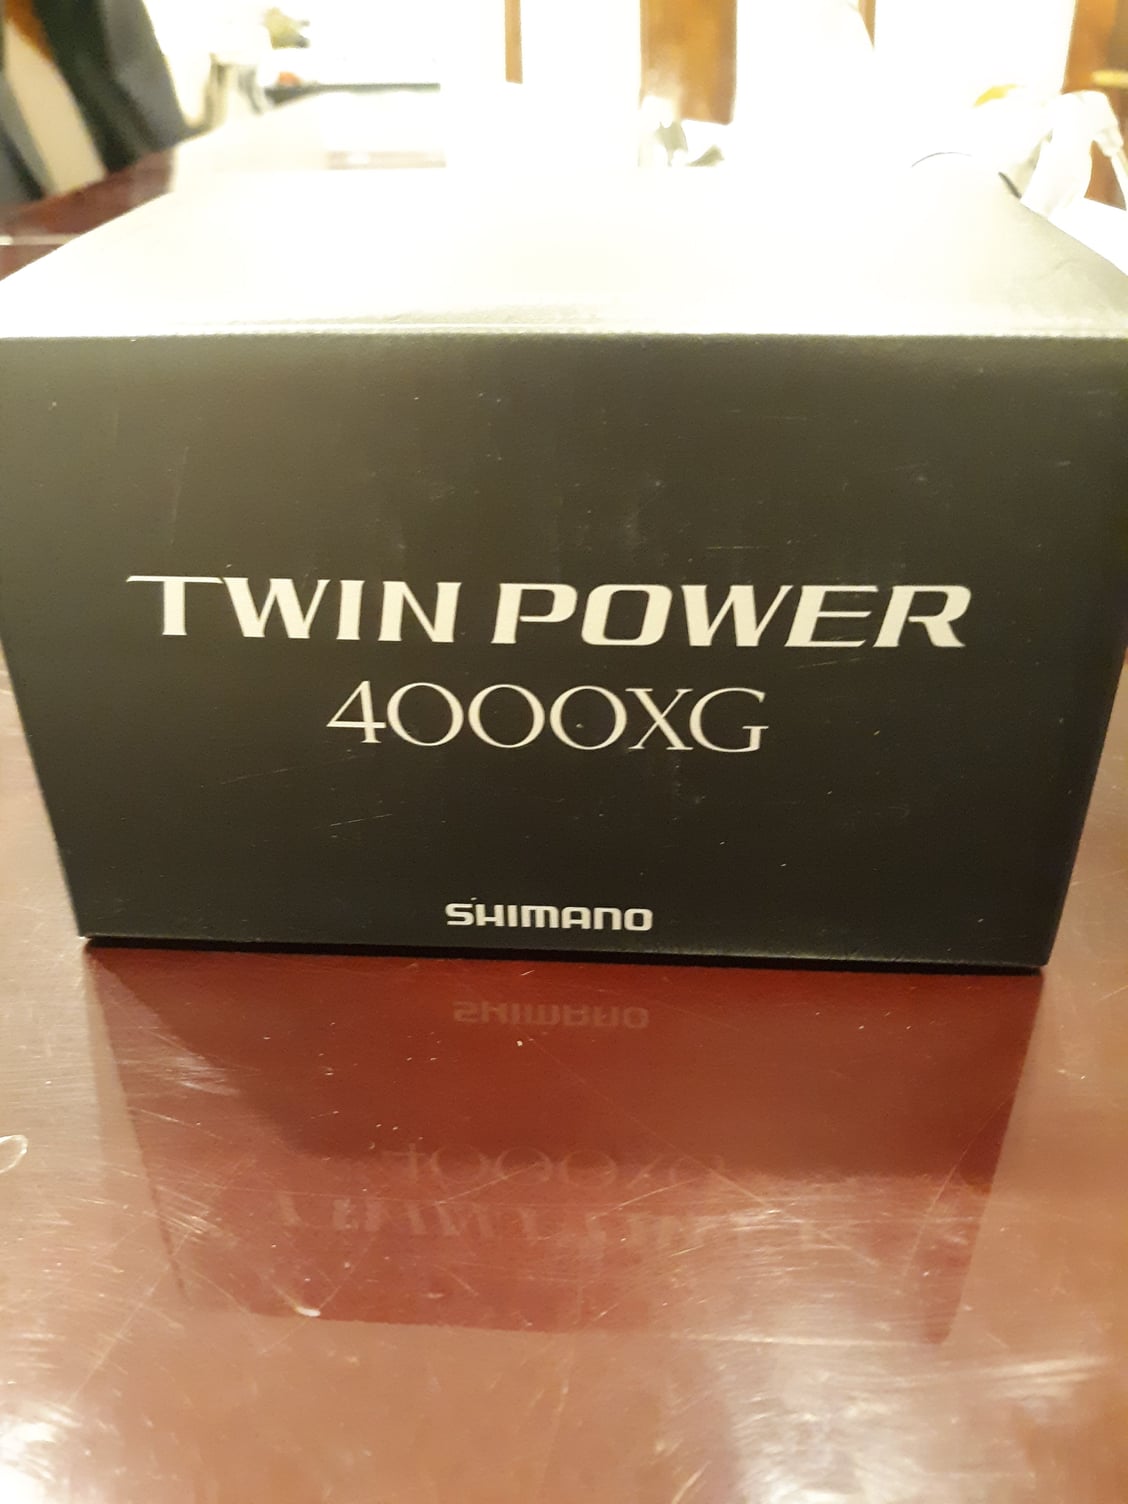 Shimano Twin Power 4000xg for sale - The Hull Truth - Boating and Fishing  Forum